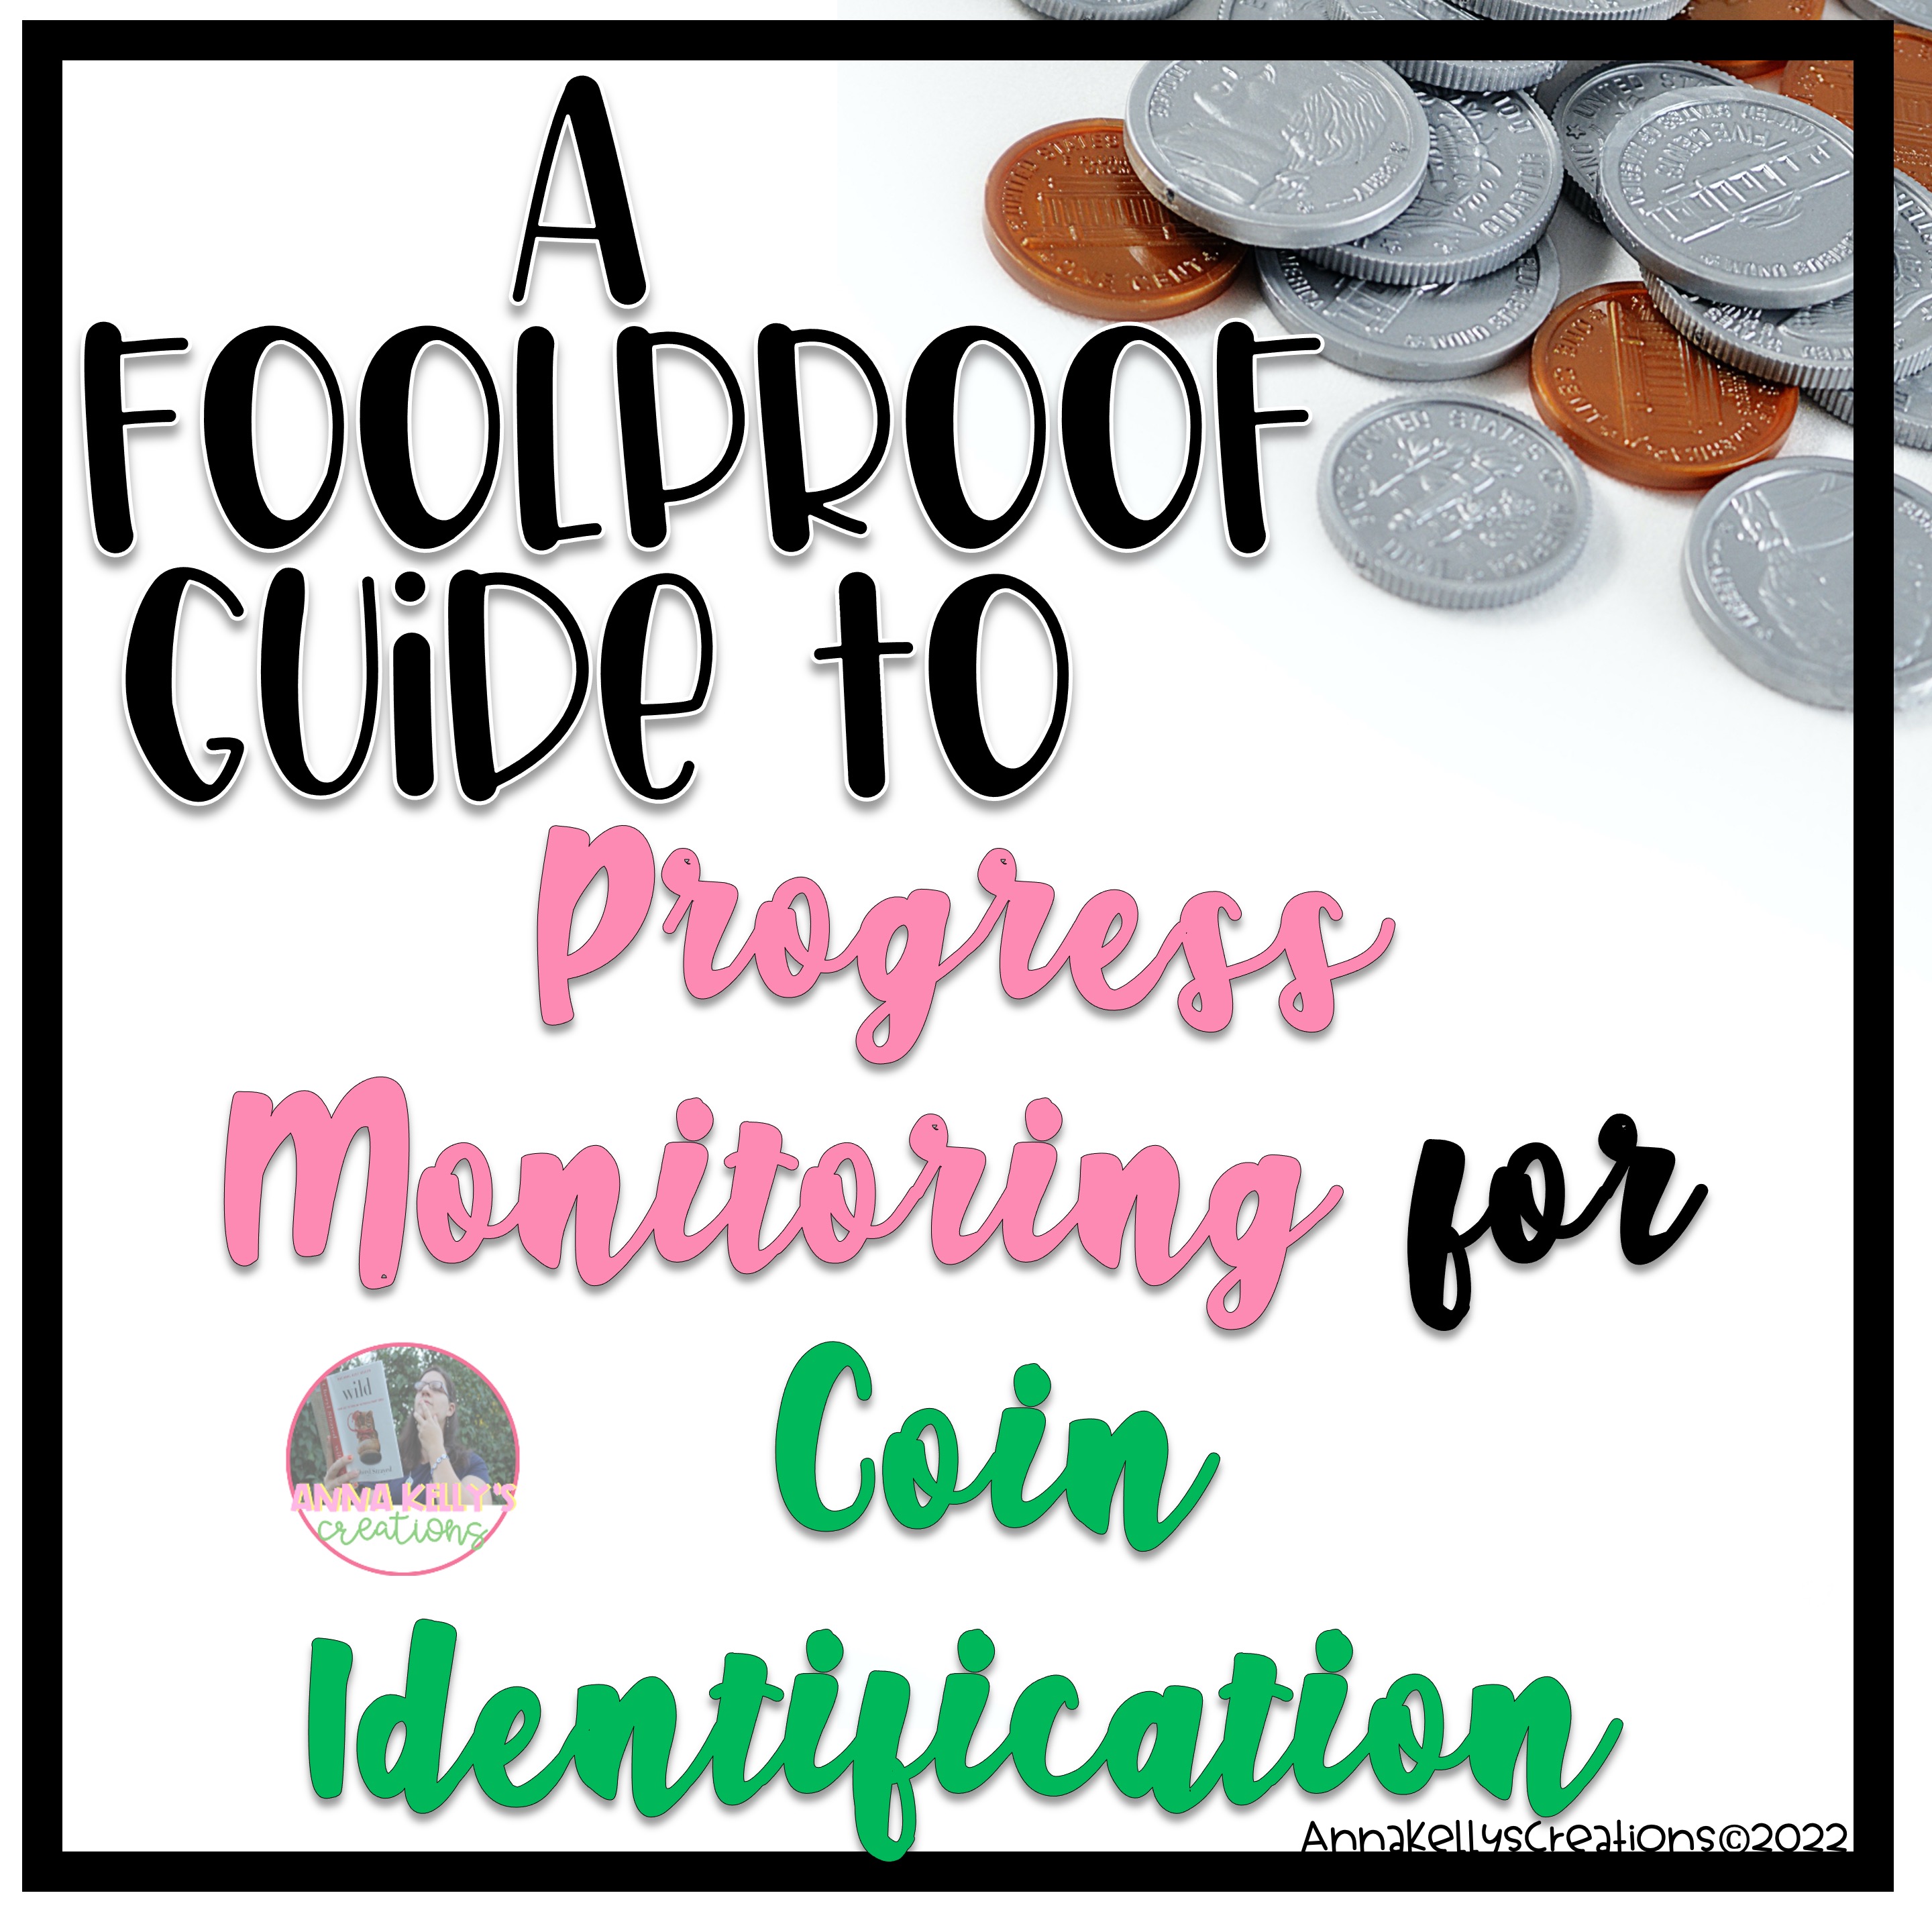 You are currently viewing A Foolproof guide to Intervention and Progress Monitoring with Coin Identification